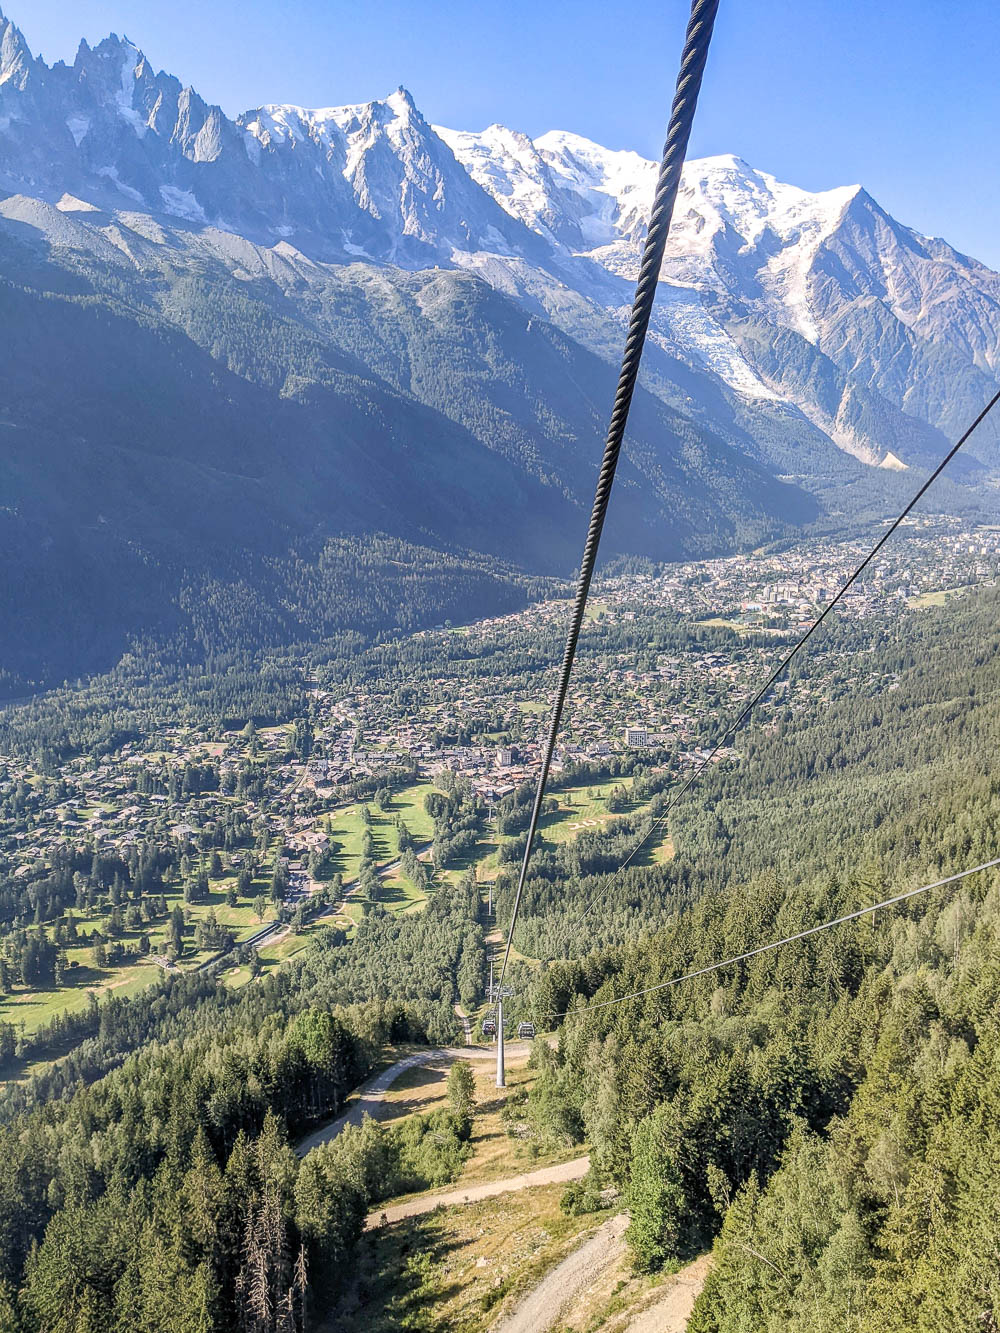 looking down on the chamonix valley from the cable car to la flegere